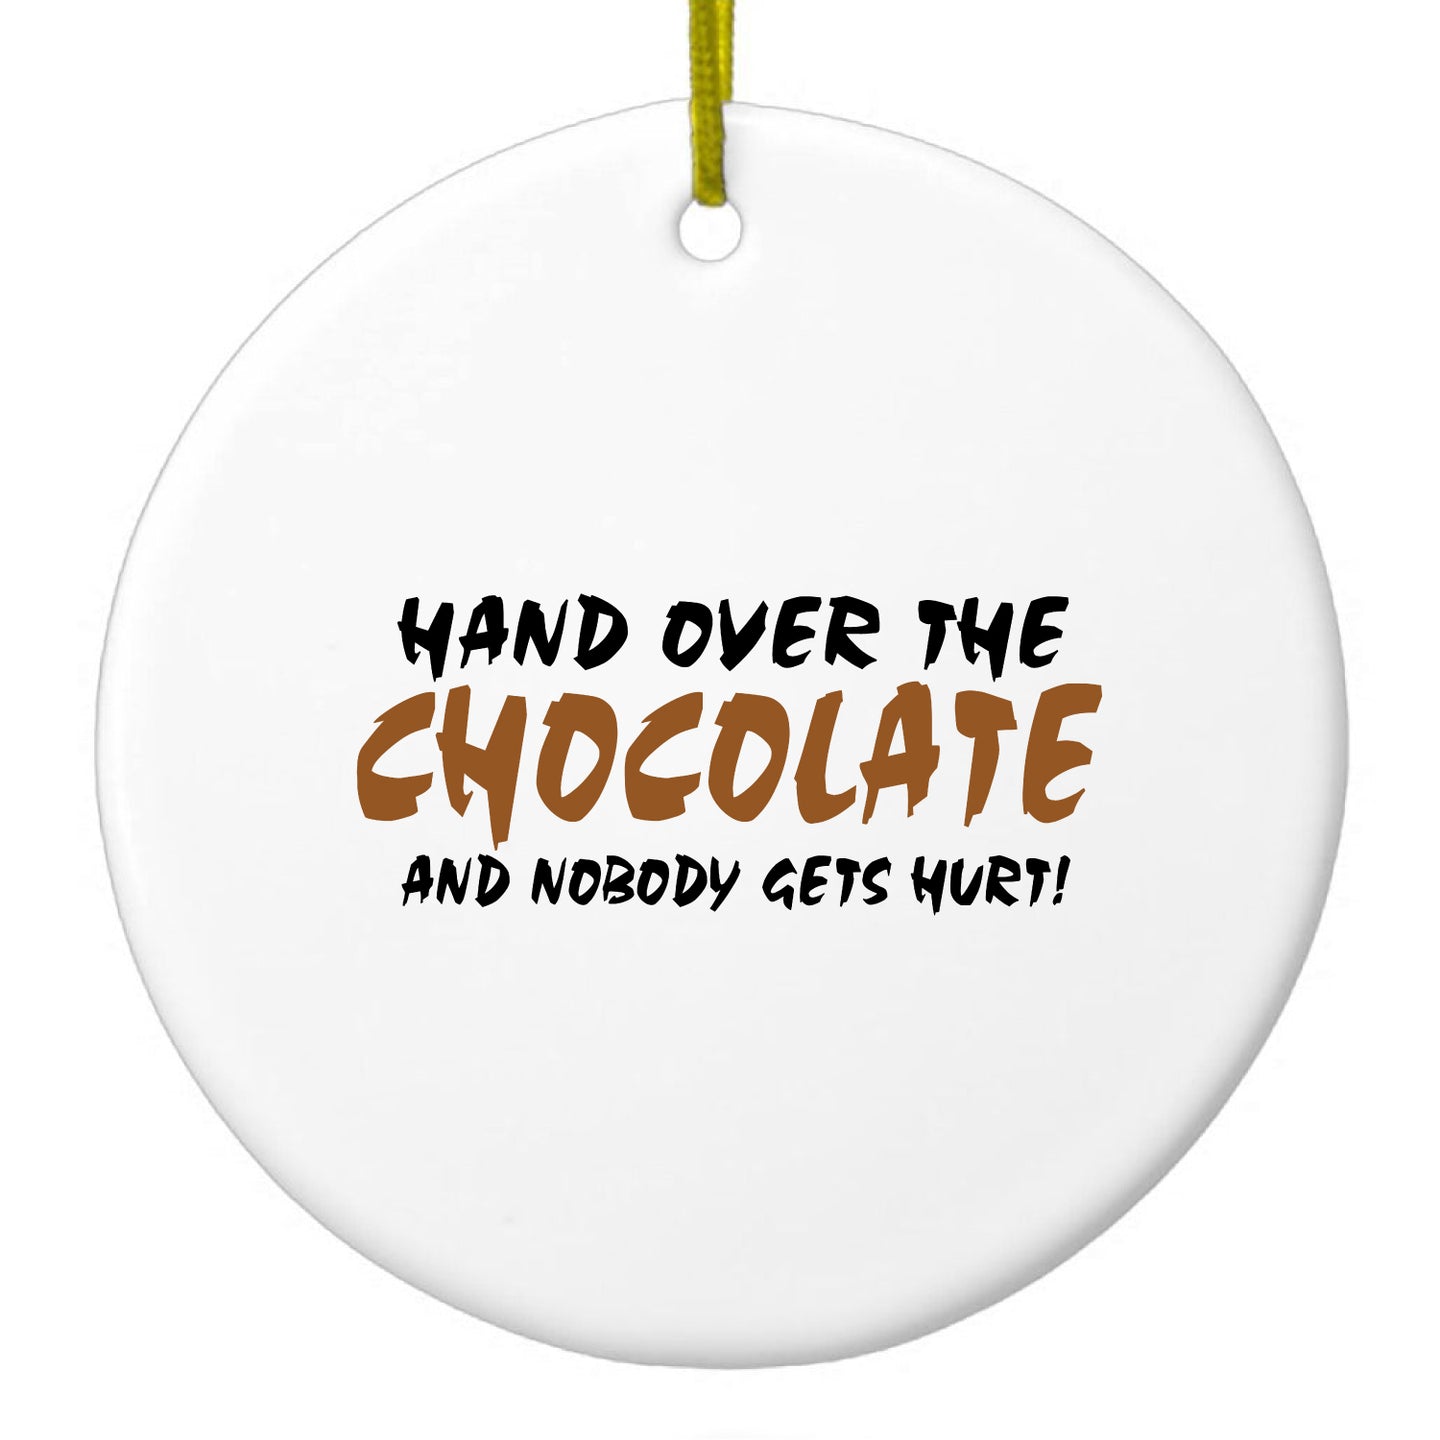 DistinctInk® Hanging Ceramic Christmas Tree Ornament with Gold String - Great Gift / Present - 2 3/4 inch Diameter - Hand Over The Chocolate Nobody Gets Hurt